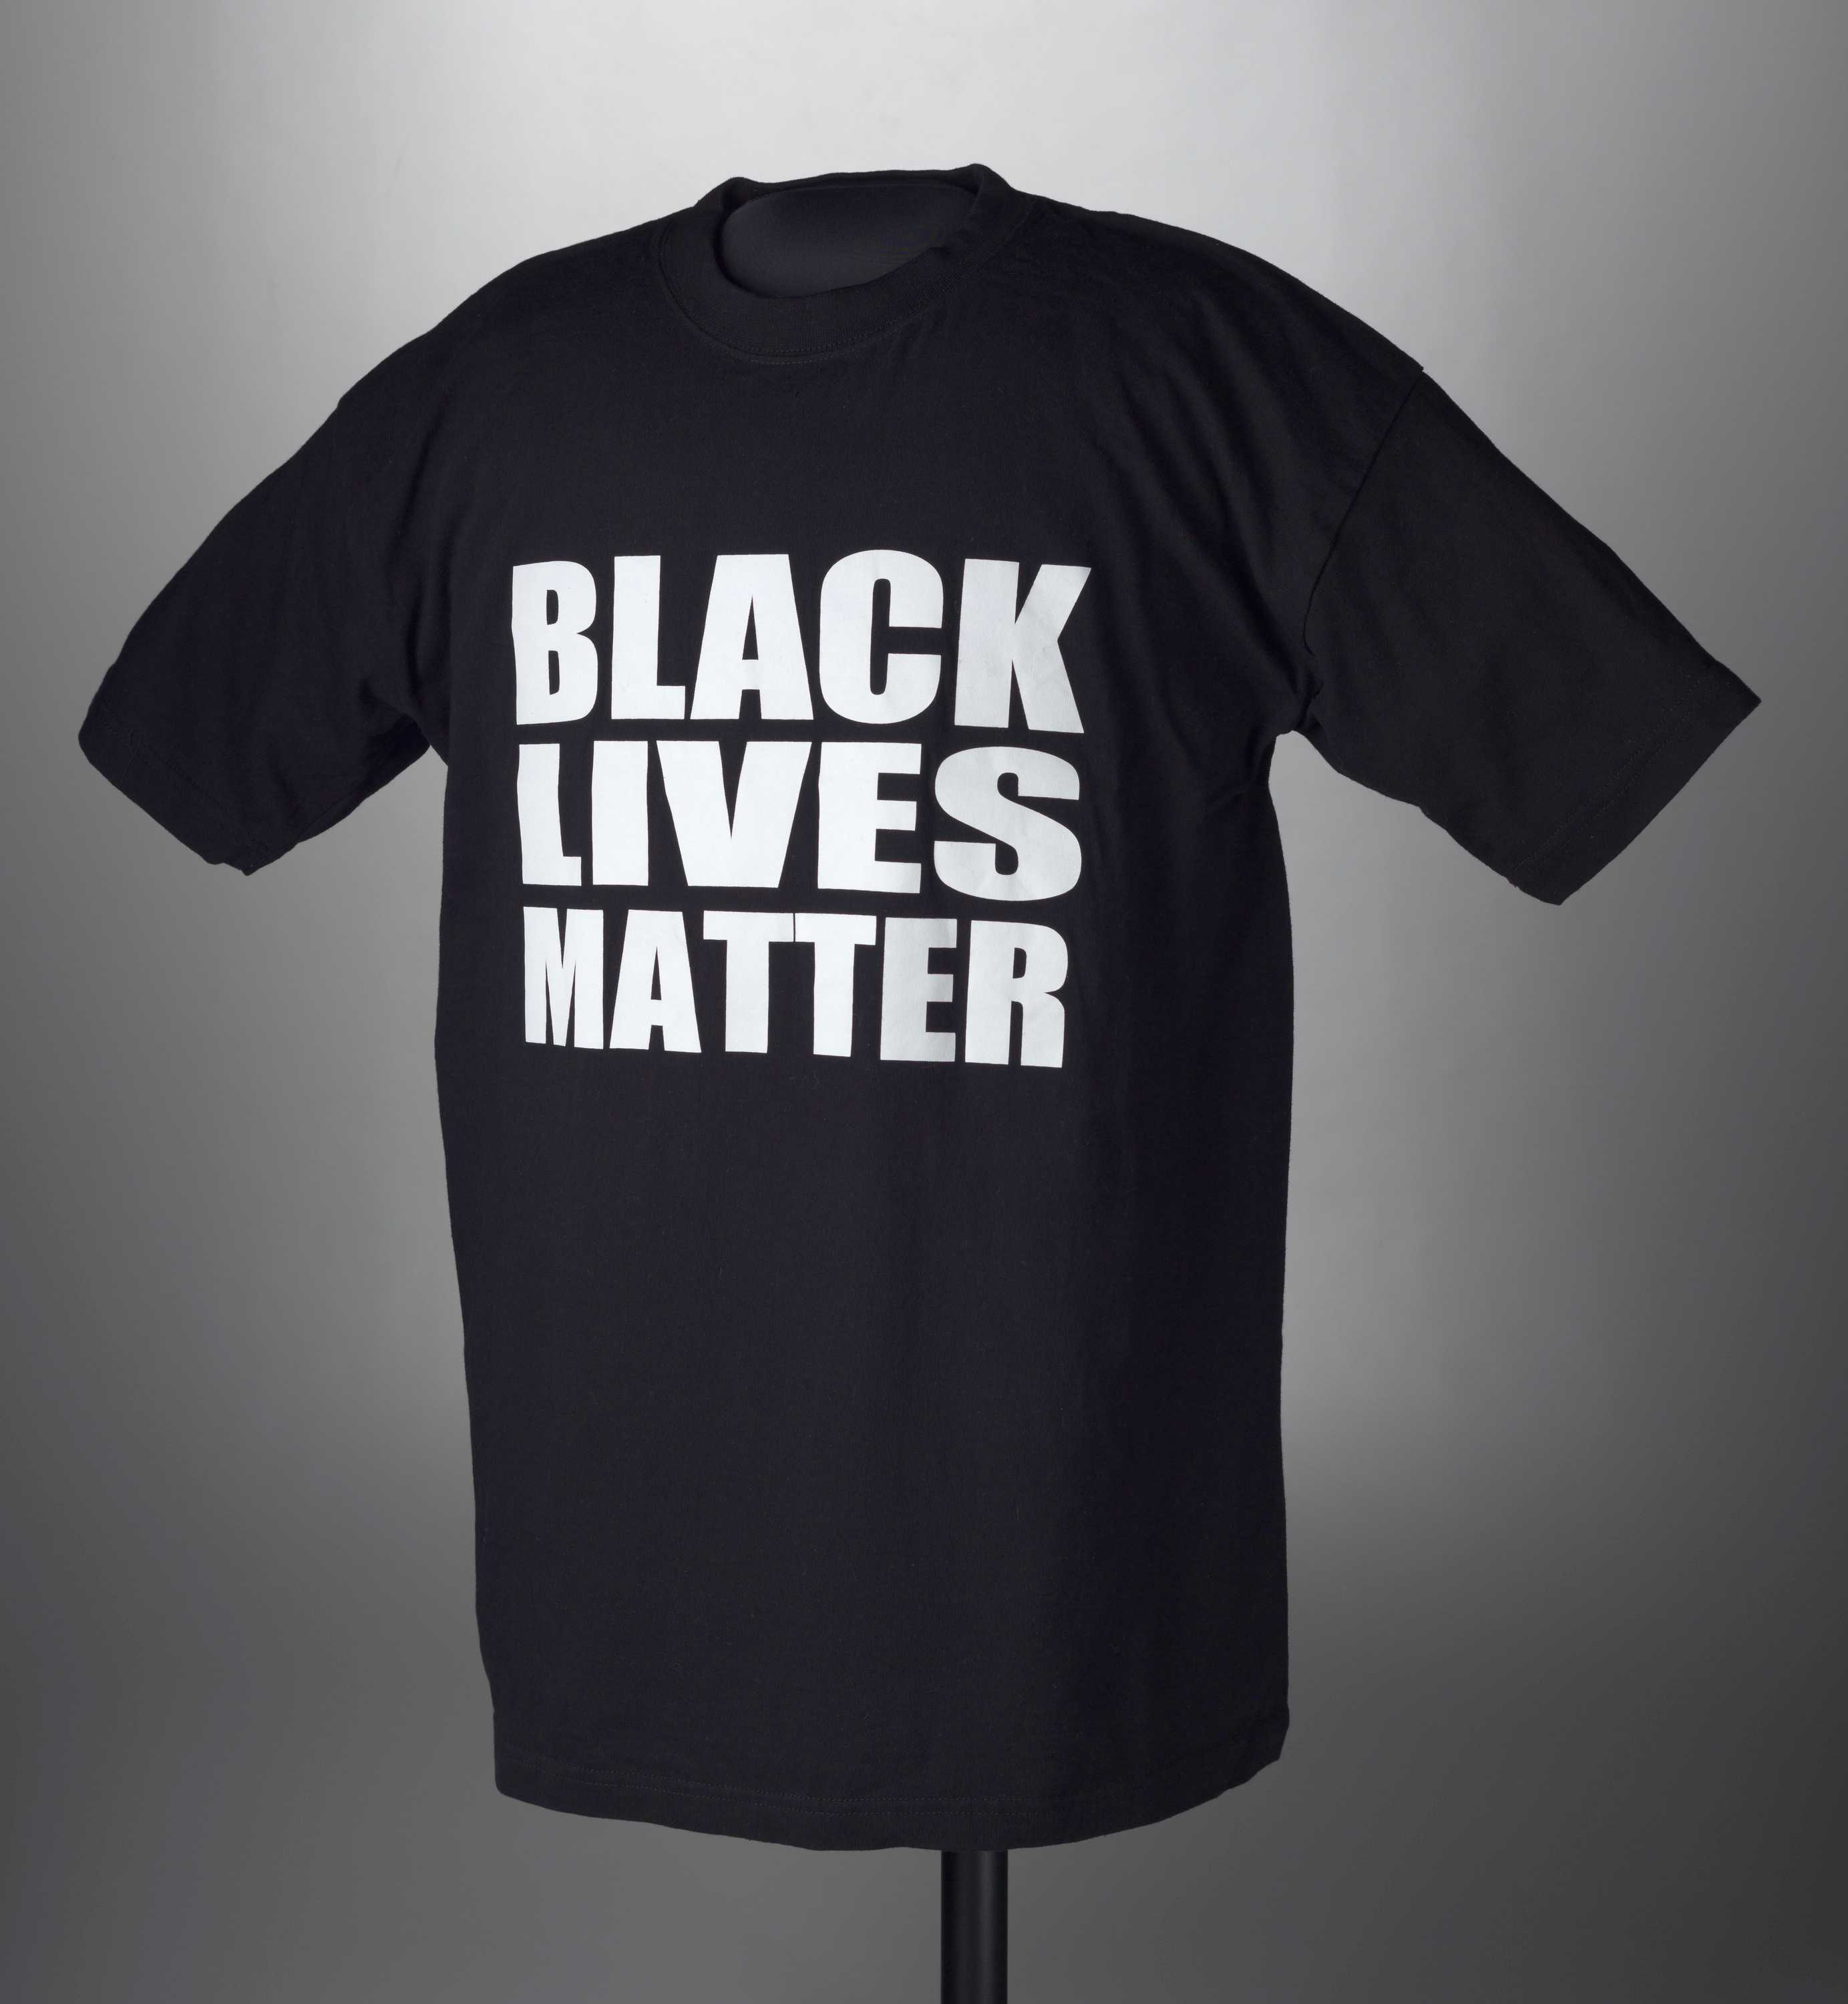 A black T-shirt with white lettering on the front. The text on the shirt reads “BLACK / LIVES / MATTER.”